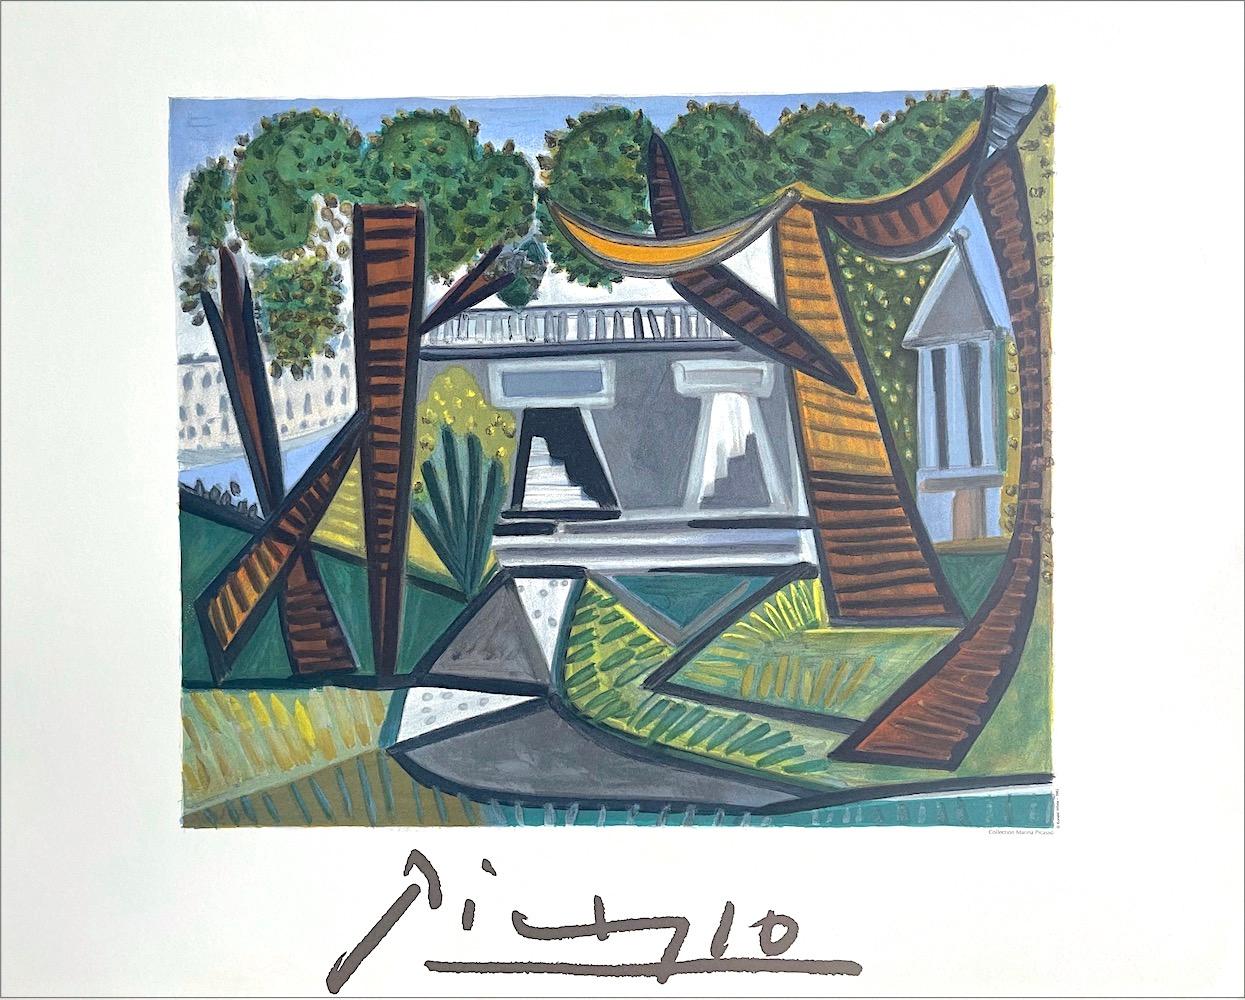 LE VERT GALANT Lithograph, Abstract Cityscape Garden, Architecture, Trees - Print by (after) Pablo Picasso